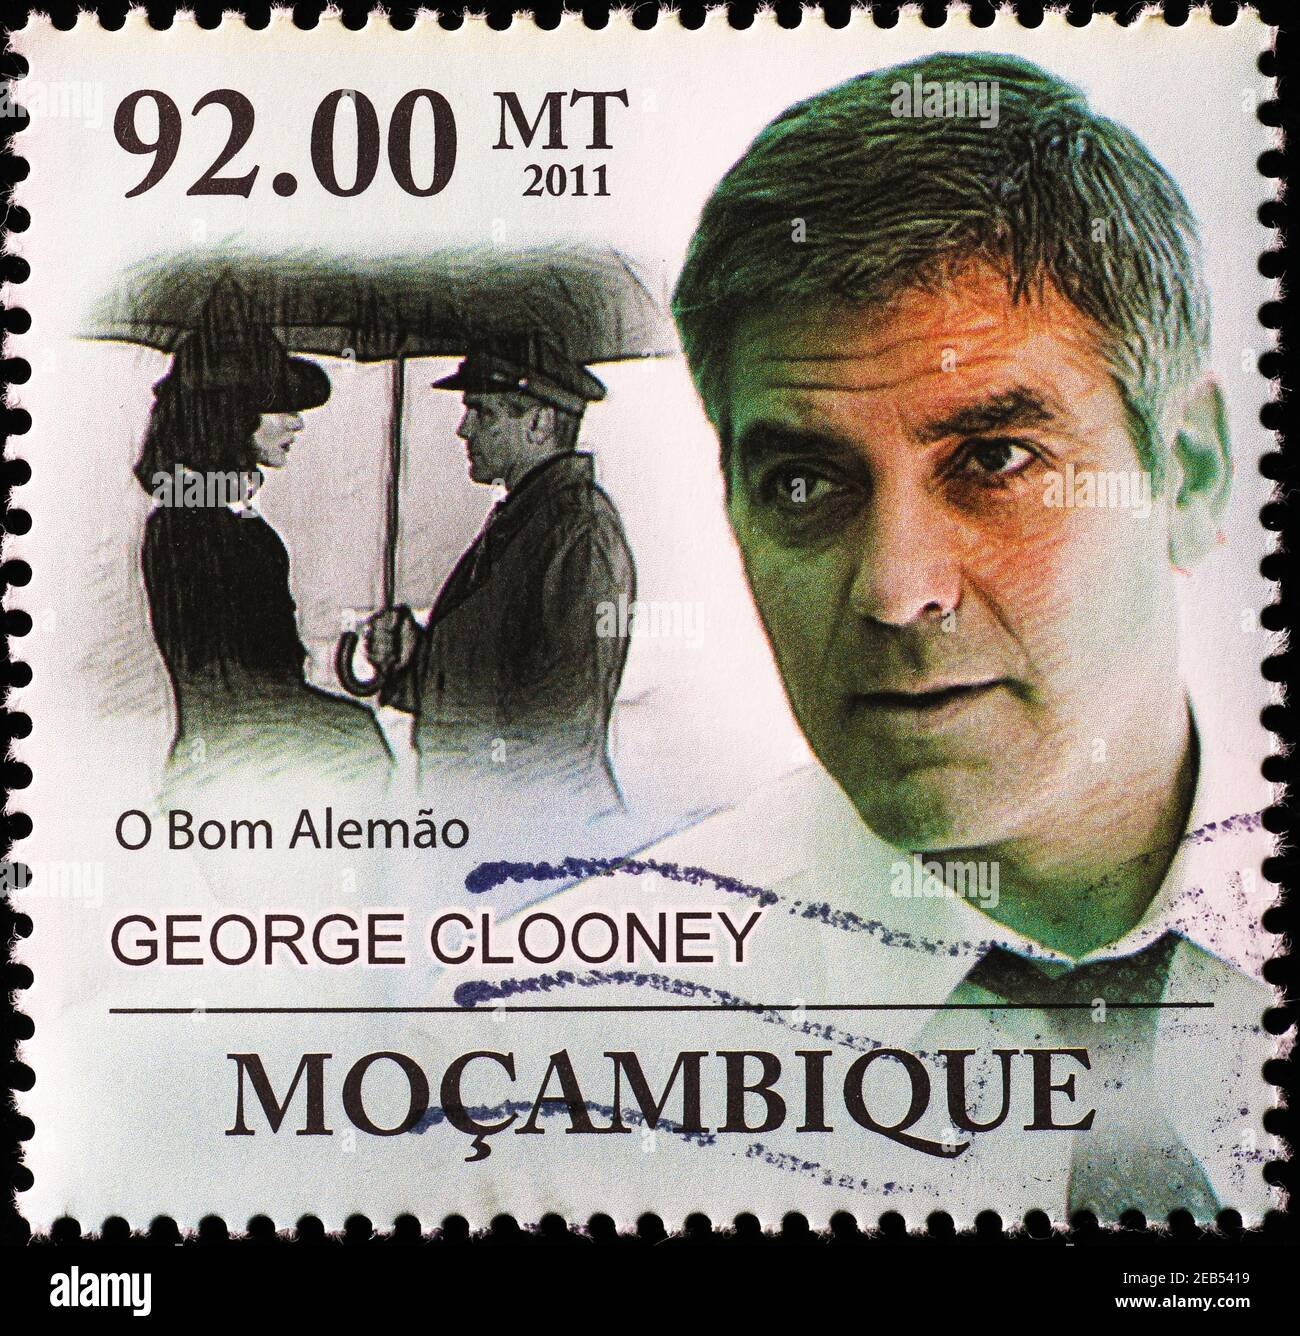 George Clooney on african postage stamp Stock Photo